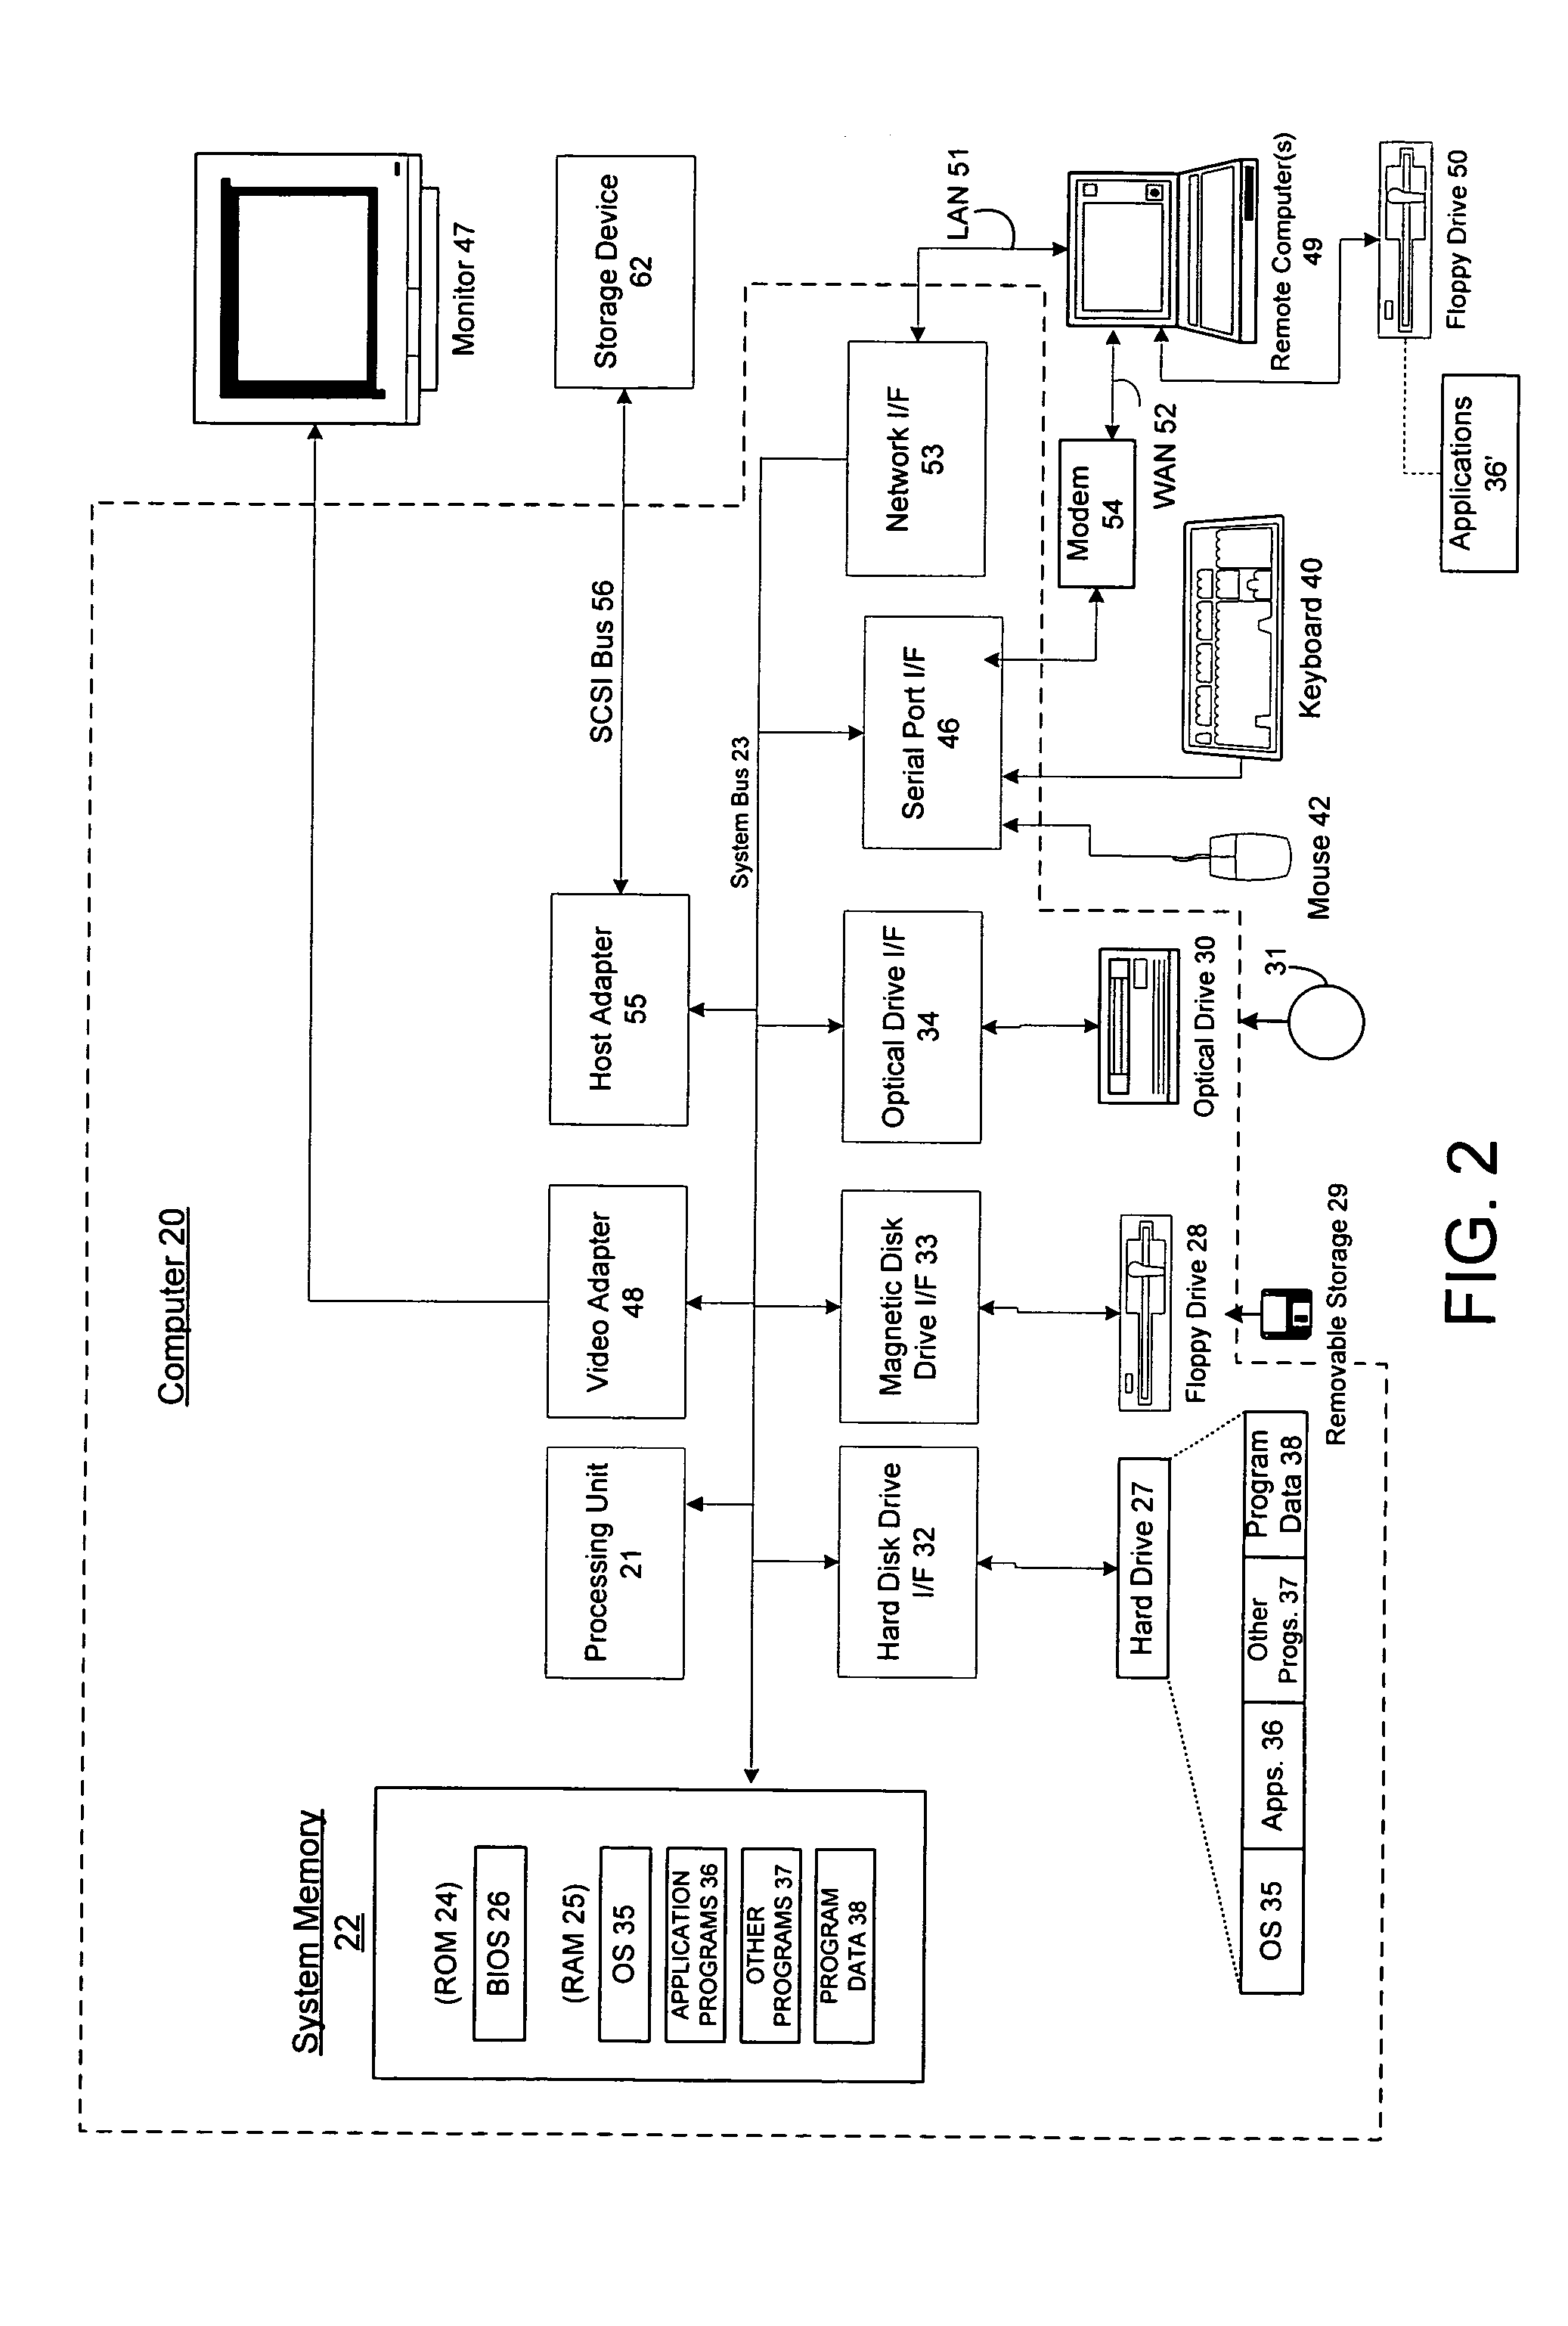 Method and system for binding enhanced software features to a persona